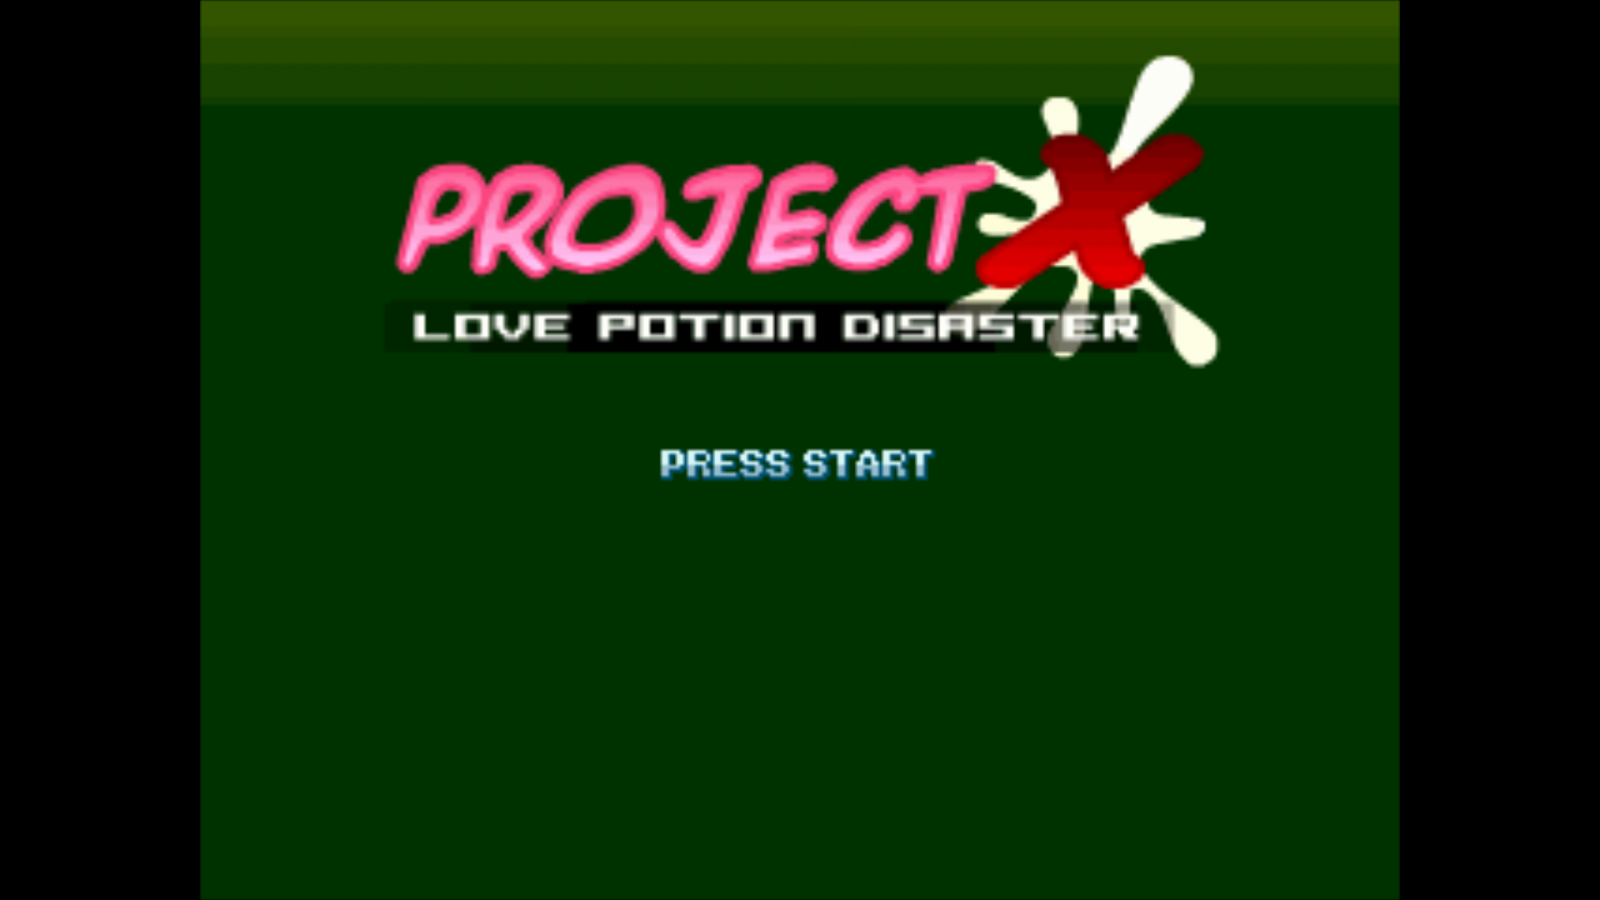 project x love potion disaster download no adfly